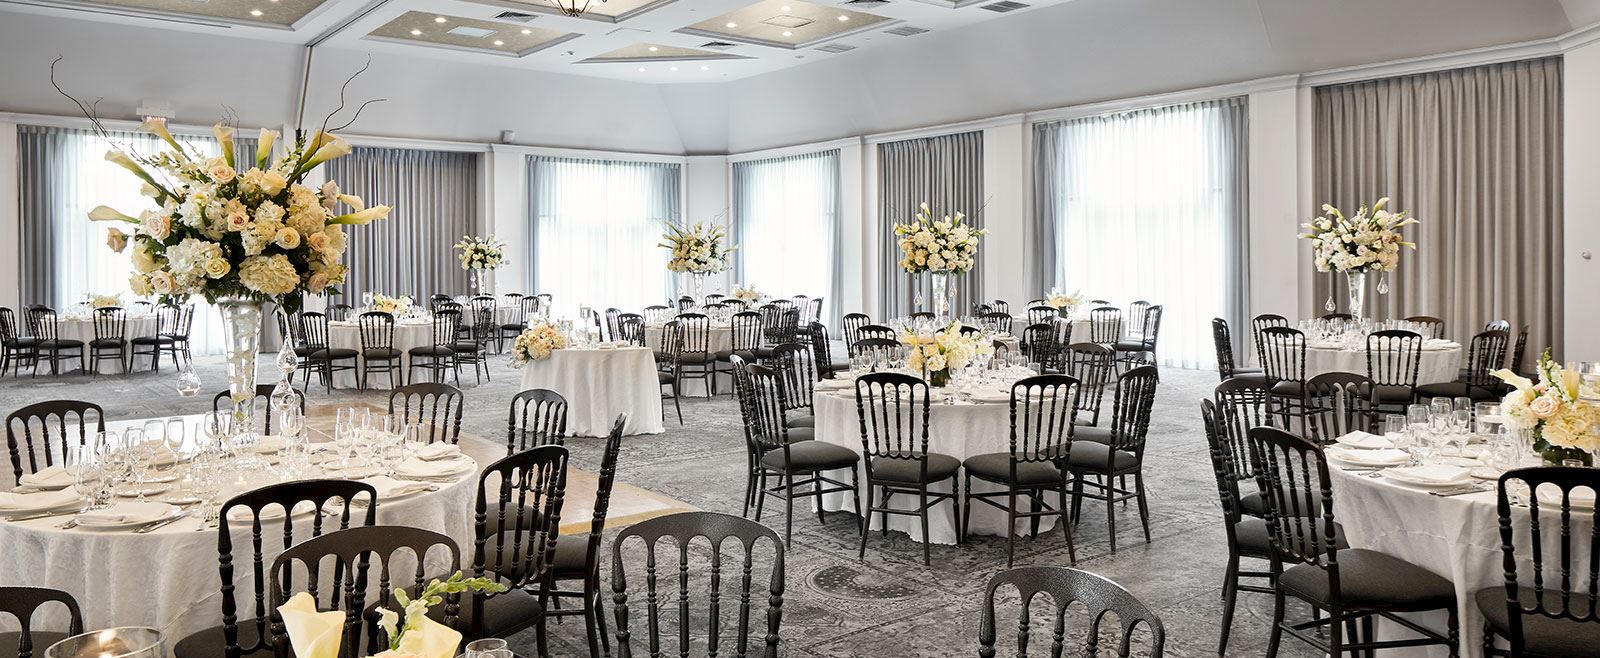 Selecting The Right Wedding Banquet That Fits You